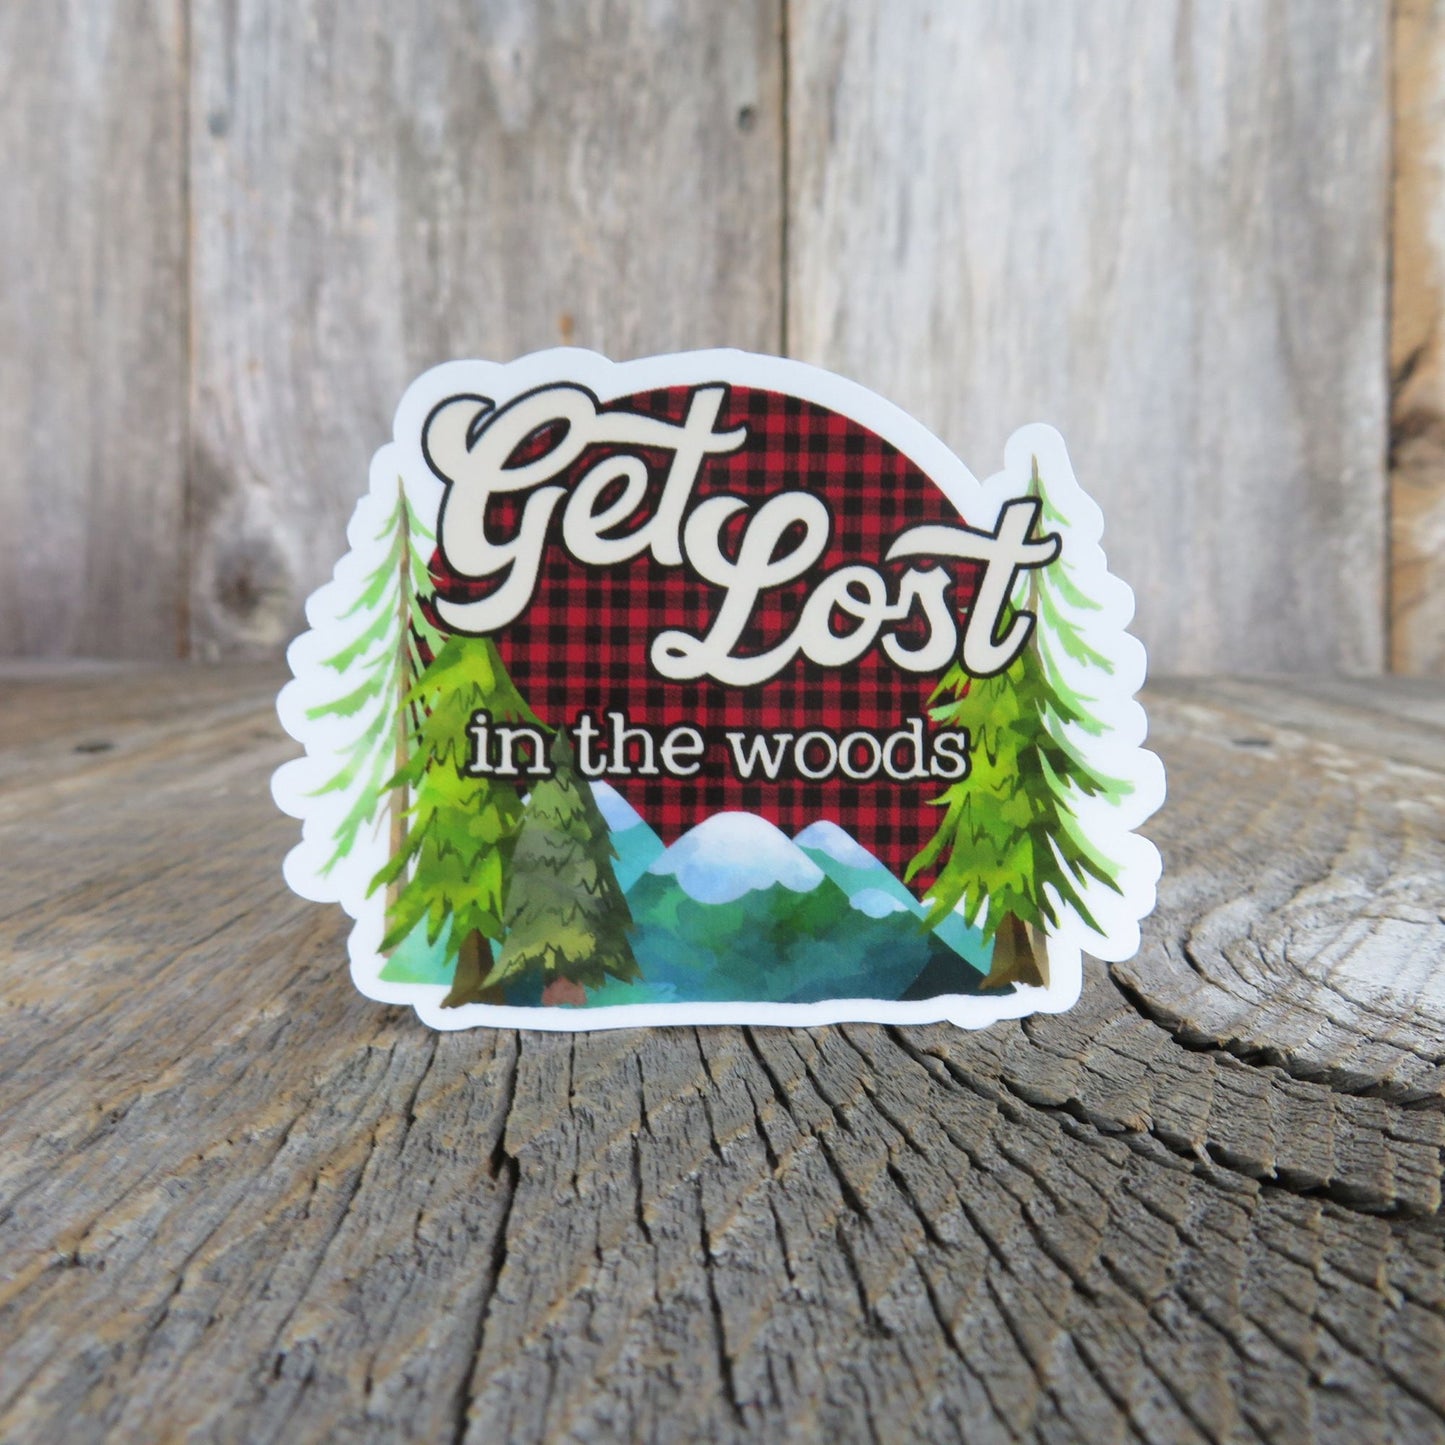 Get Lost In The Woods Sticker Waterproof Back To Nature Unplug Outdoors Lover Relaxation